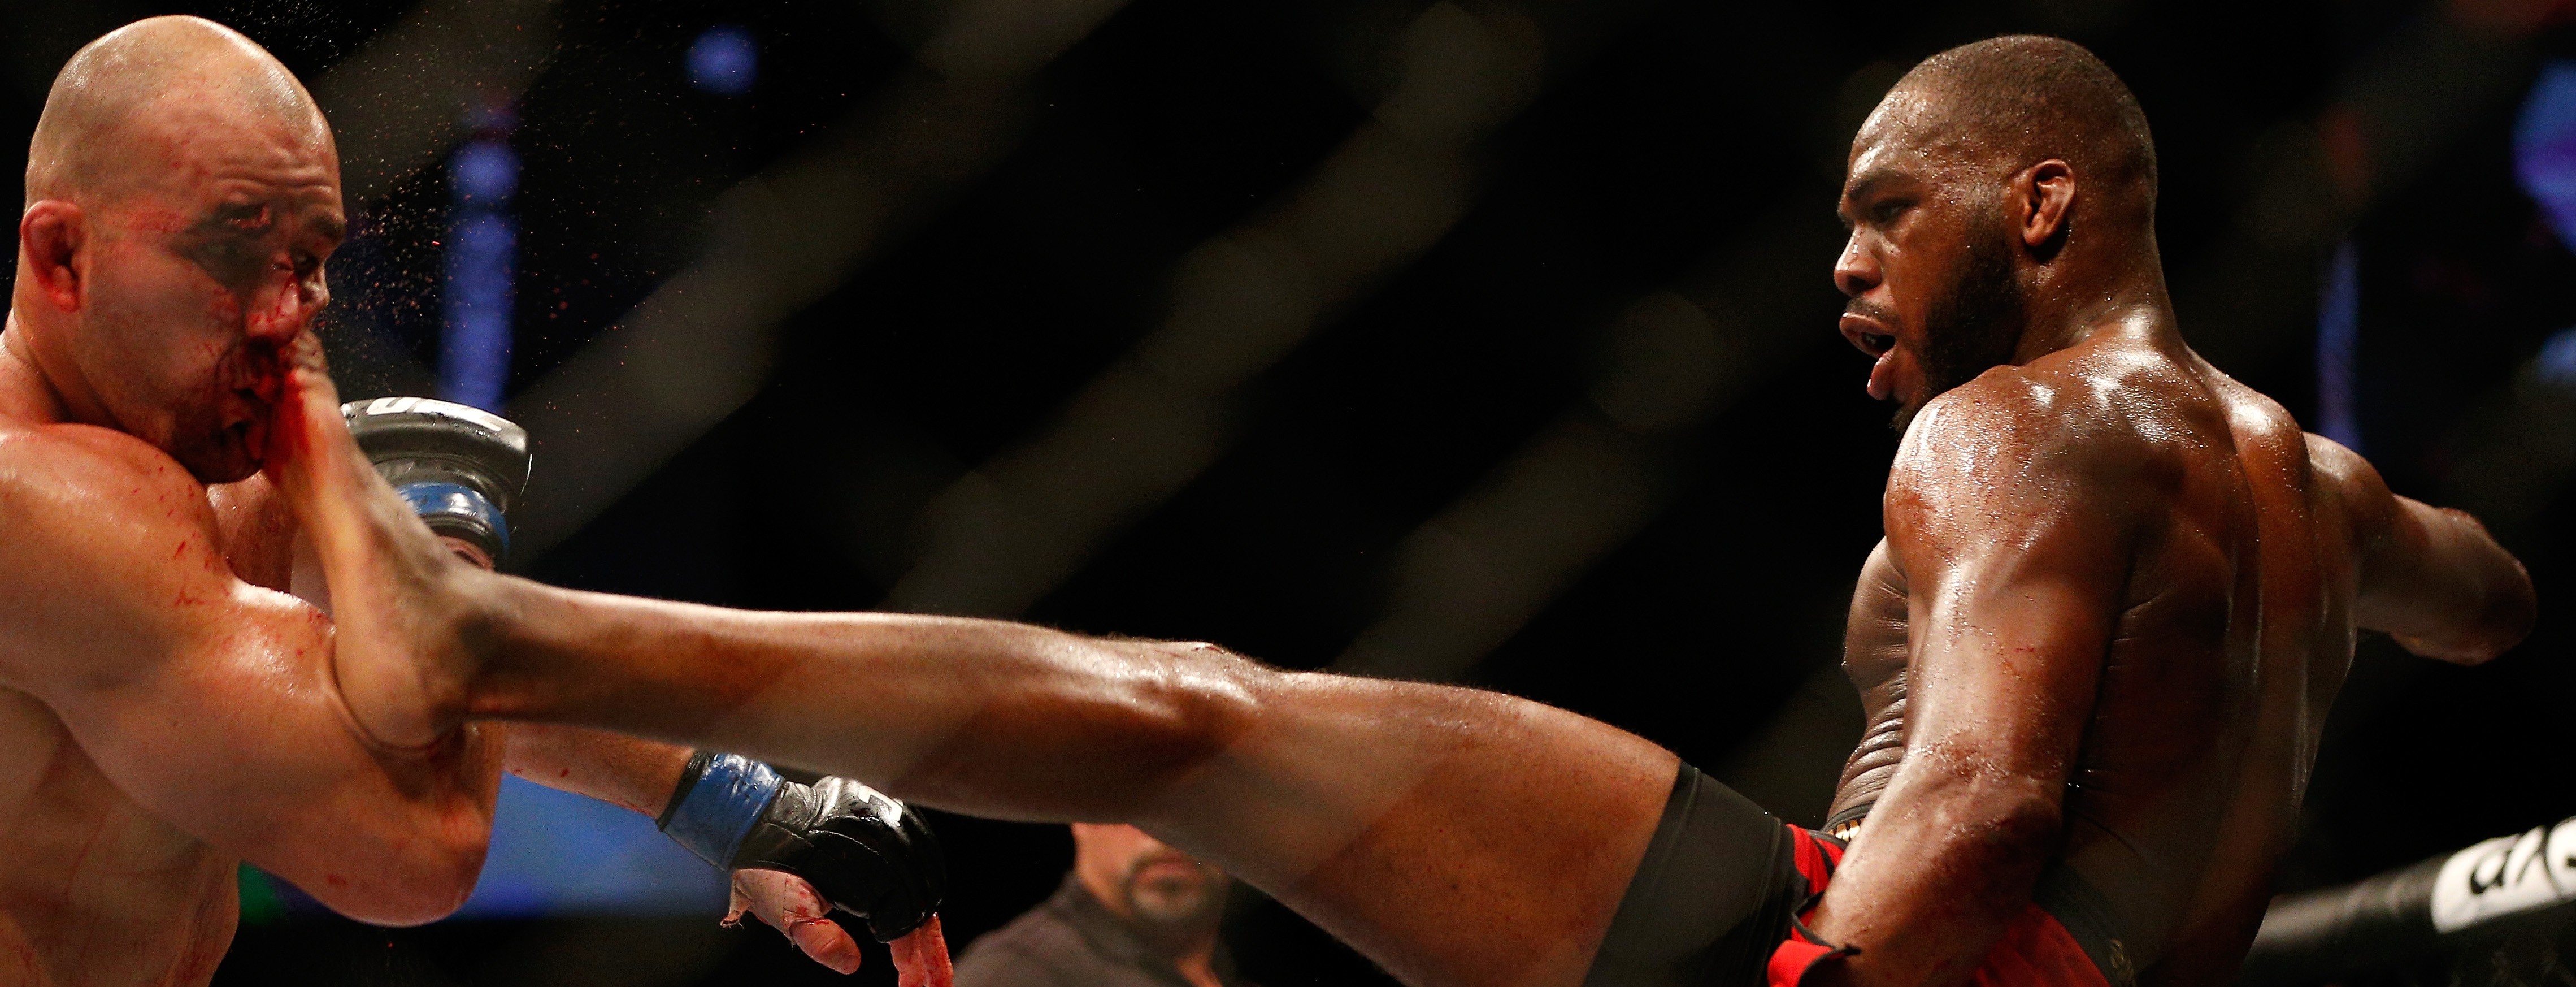 Bones Wins; Can Anyone Keep Up With the Jones? UFC 172 Main Event